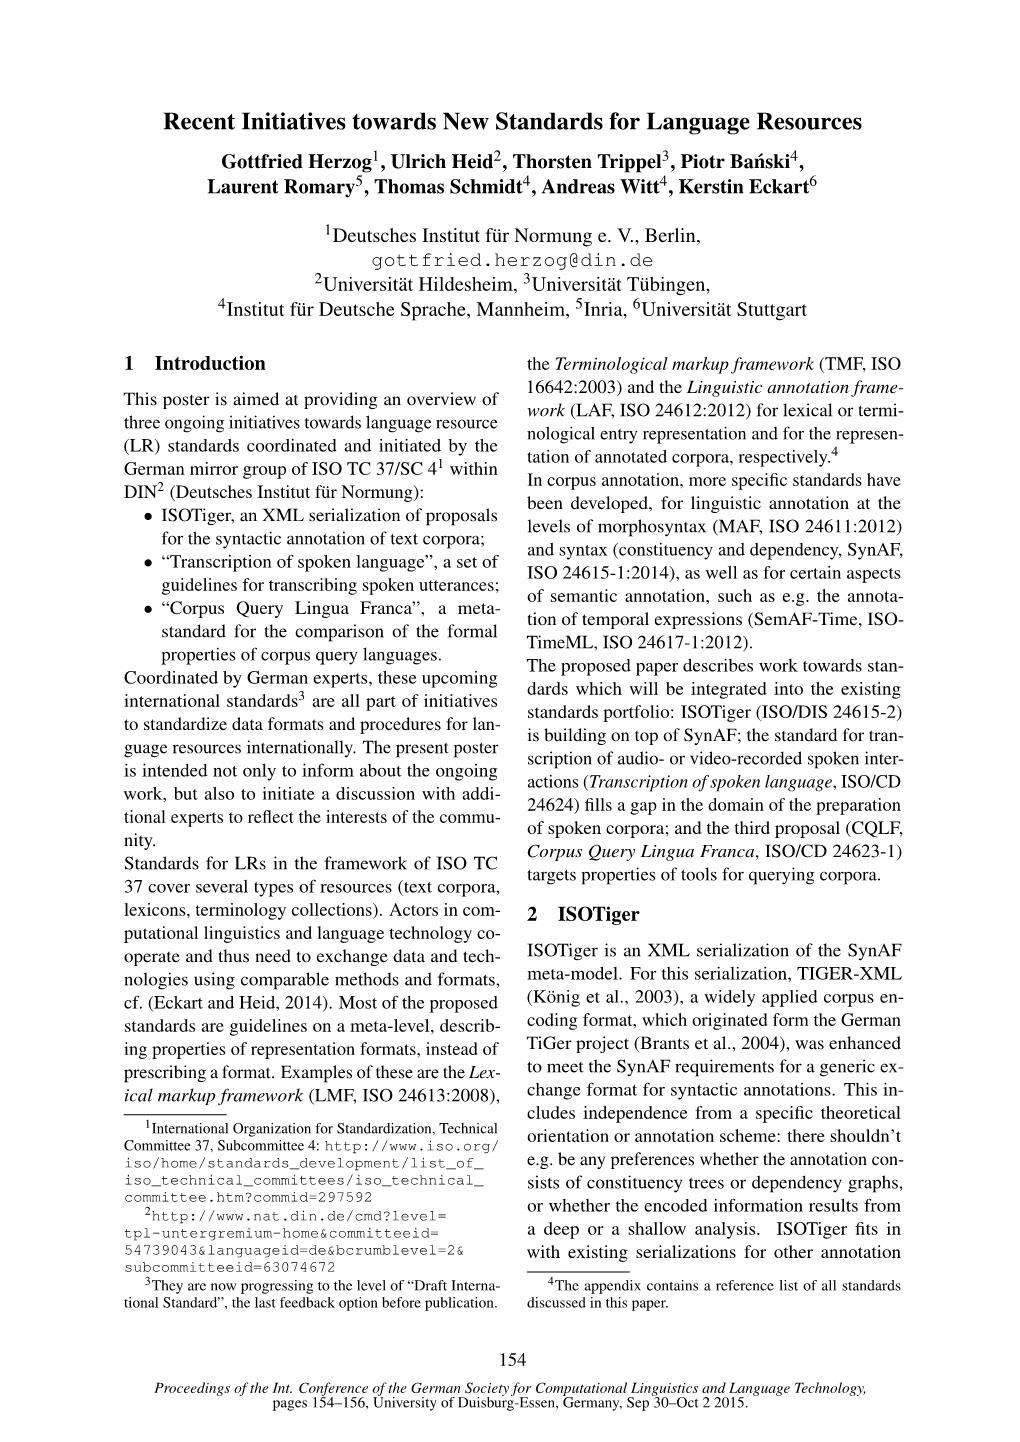 Proceedings of the International Conference of the German Society for Computational Linguistics and Language Technology